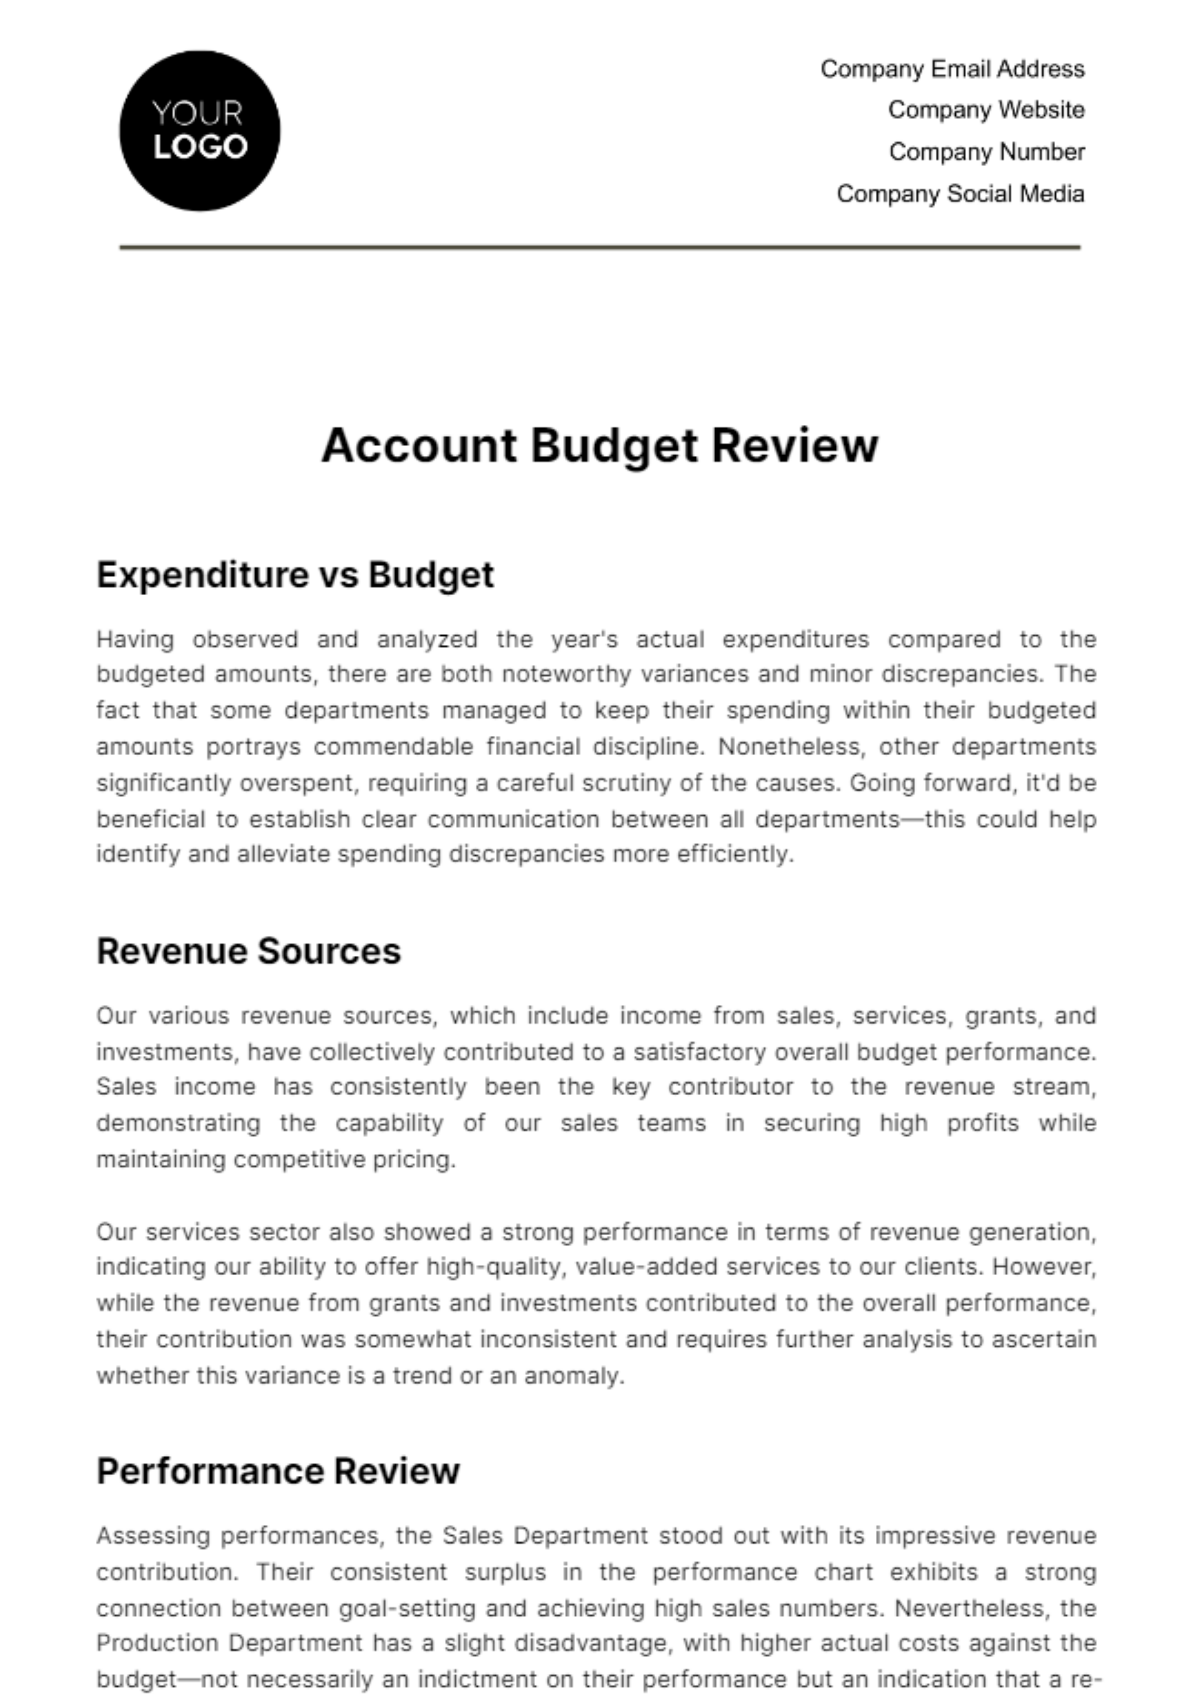 Free Account Budget Review Template